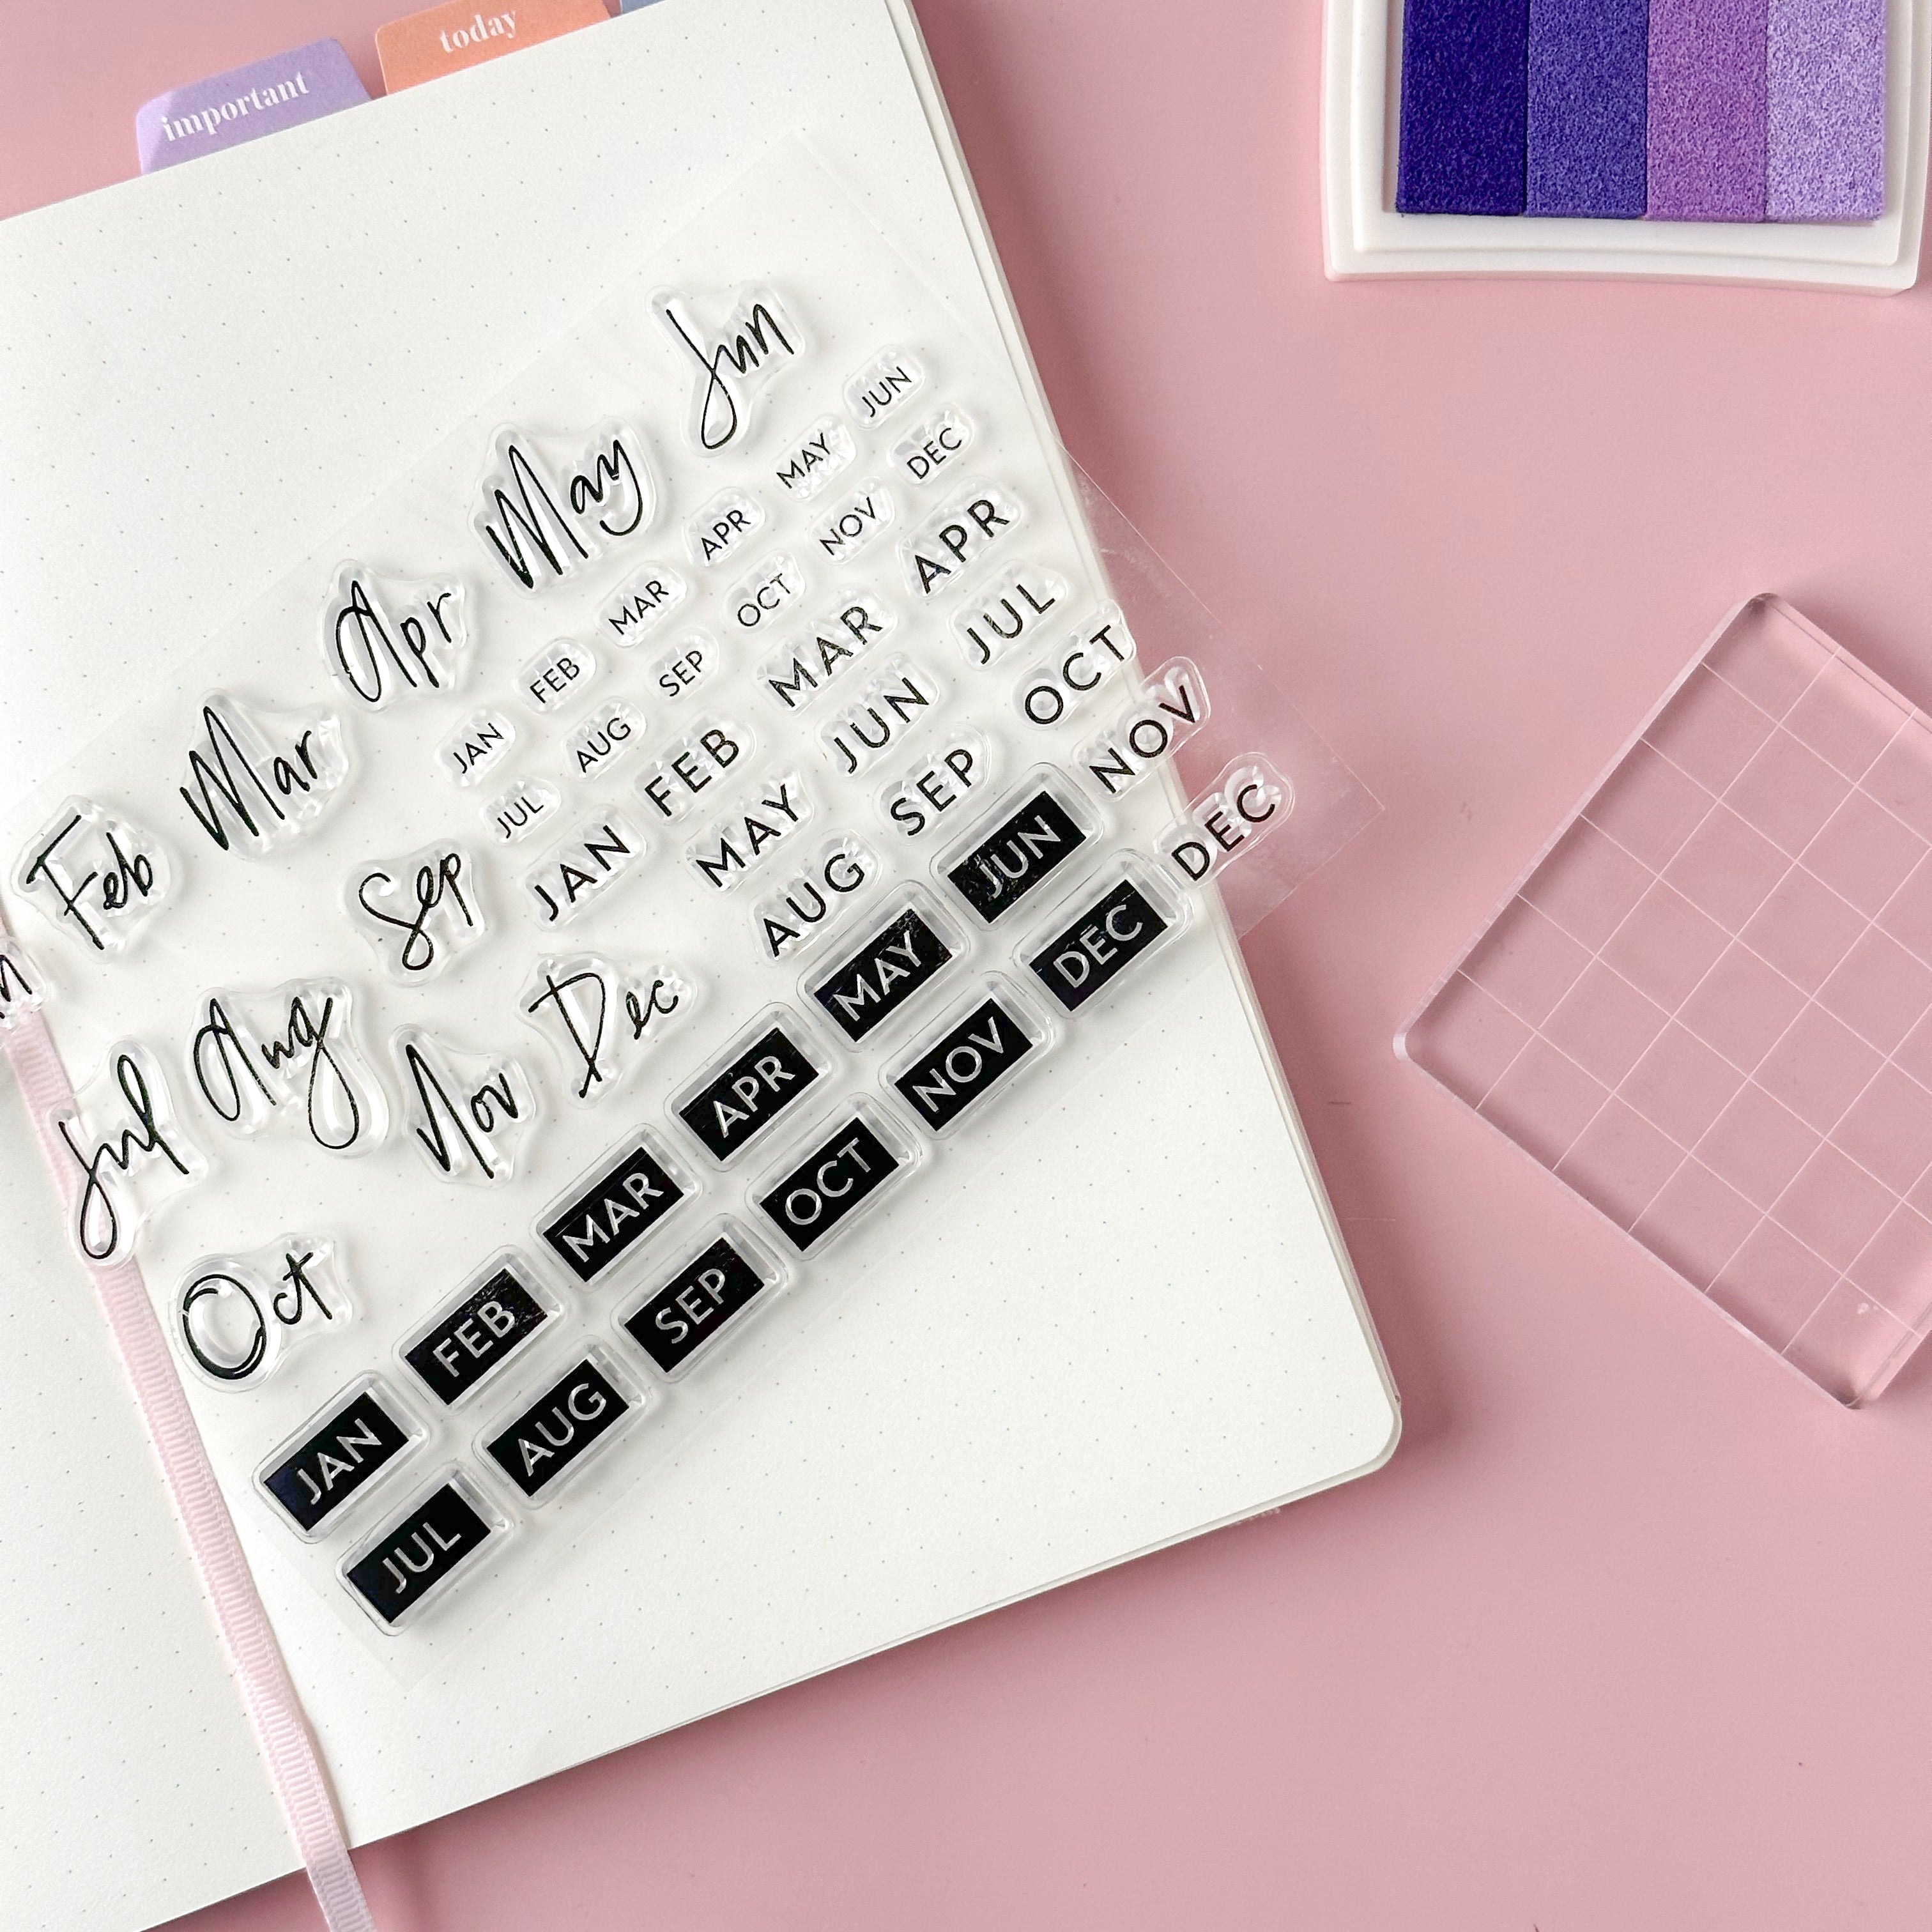 Organize your routines with our stylish silicone stamps, adorned with script and text including months and days of the week, allowing you to effortlessly design and customize habit tracking spreads in your planner or journal. These stamps are sold at BBB Supplies Craft Shop.